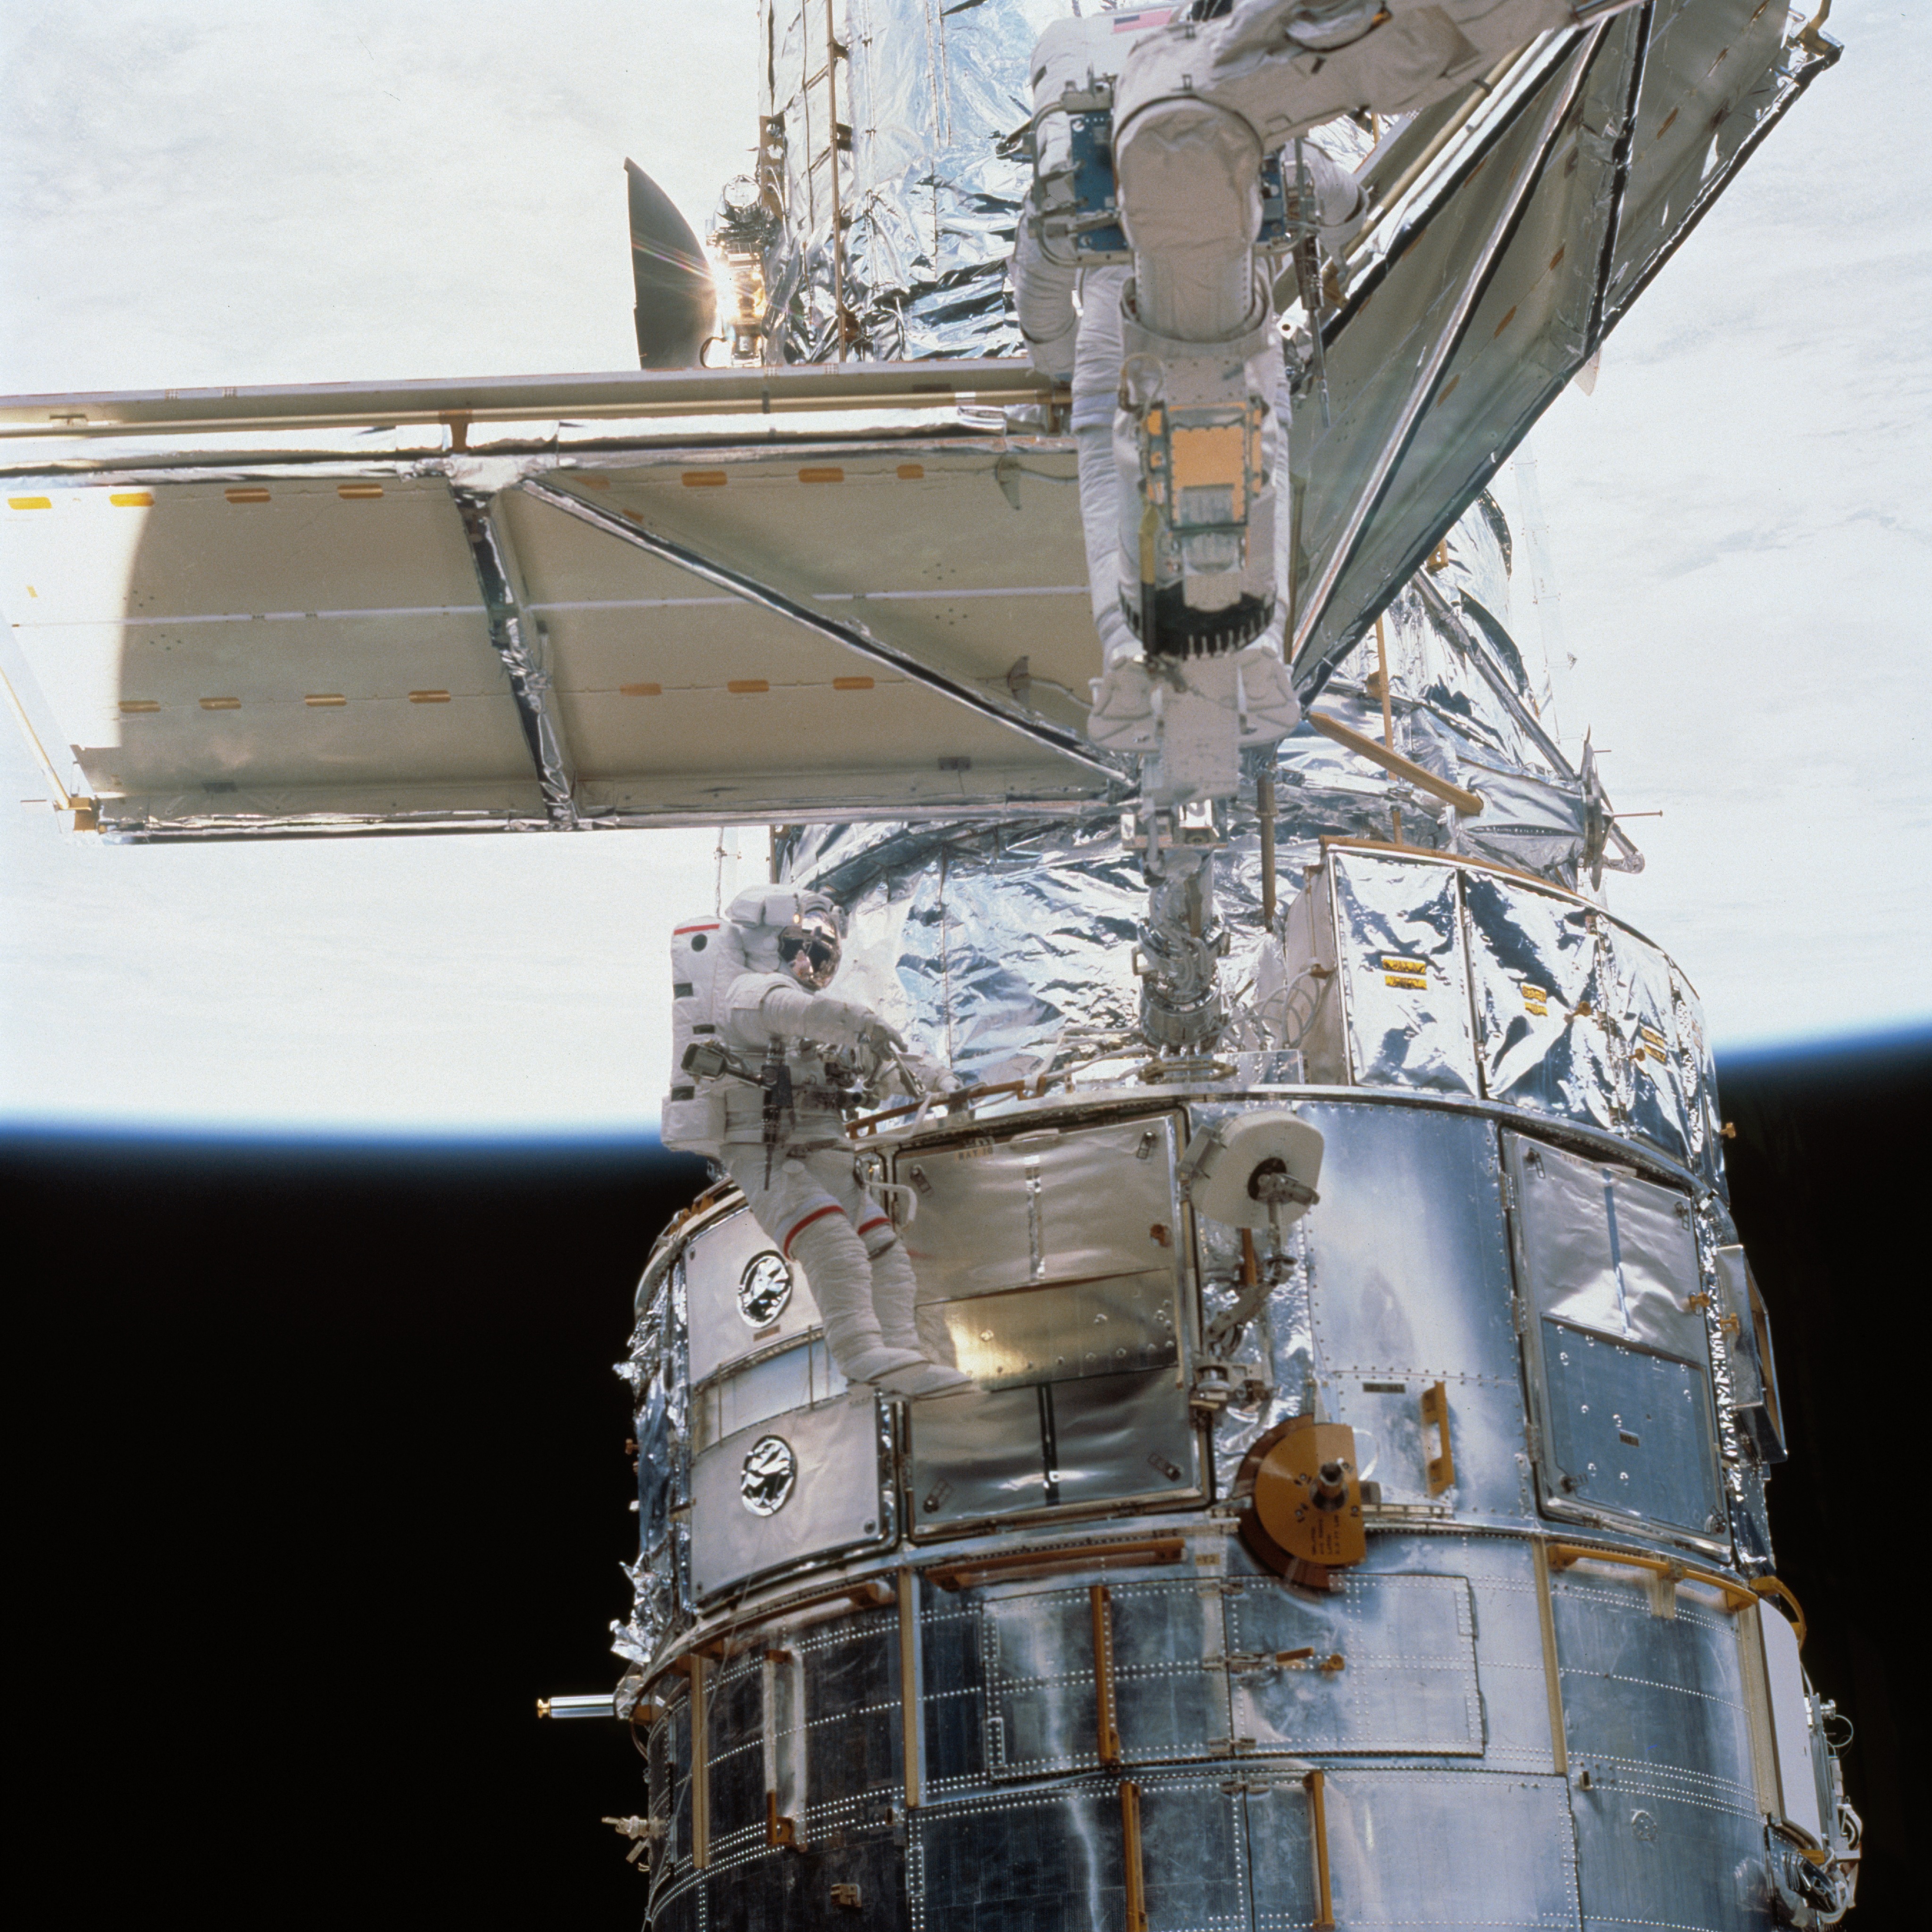 Two astronauts install a new solar panel on Hubble, one of them is unfolding it.